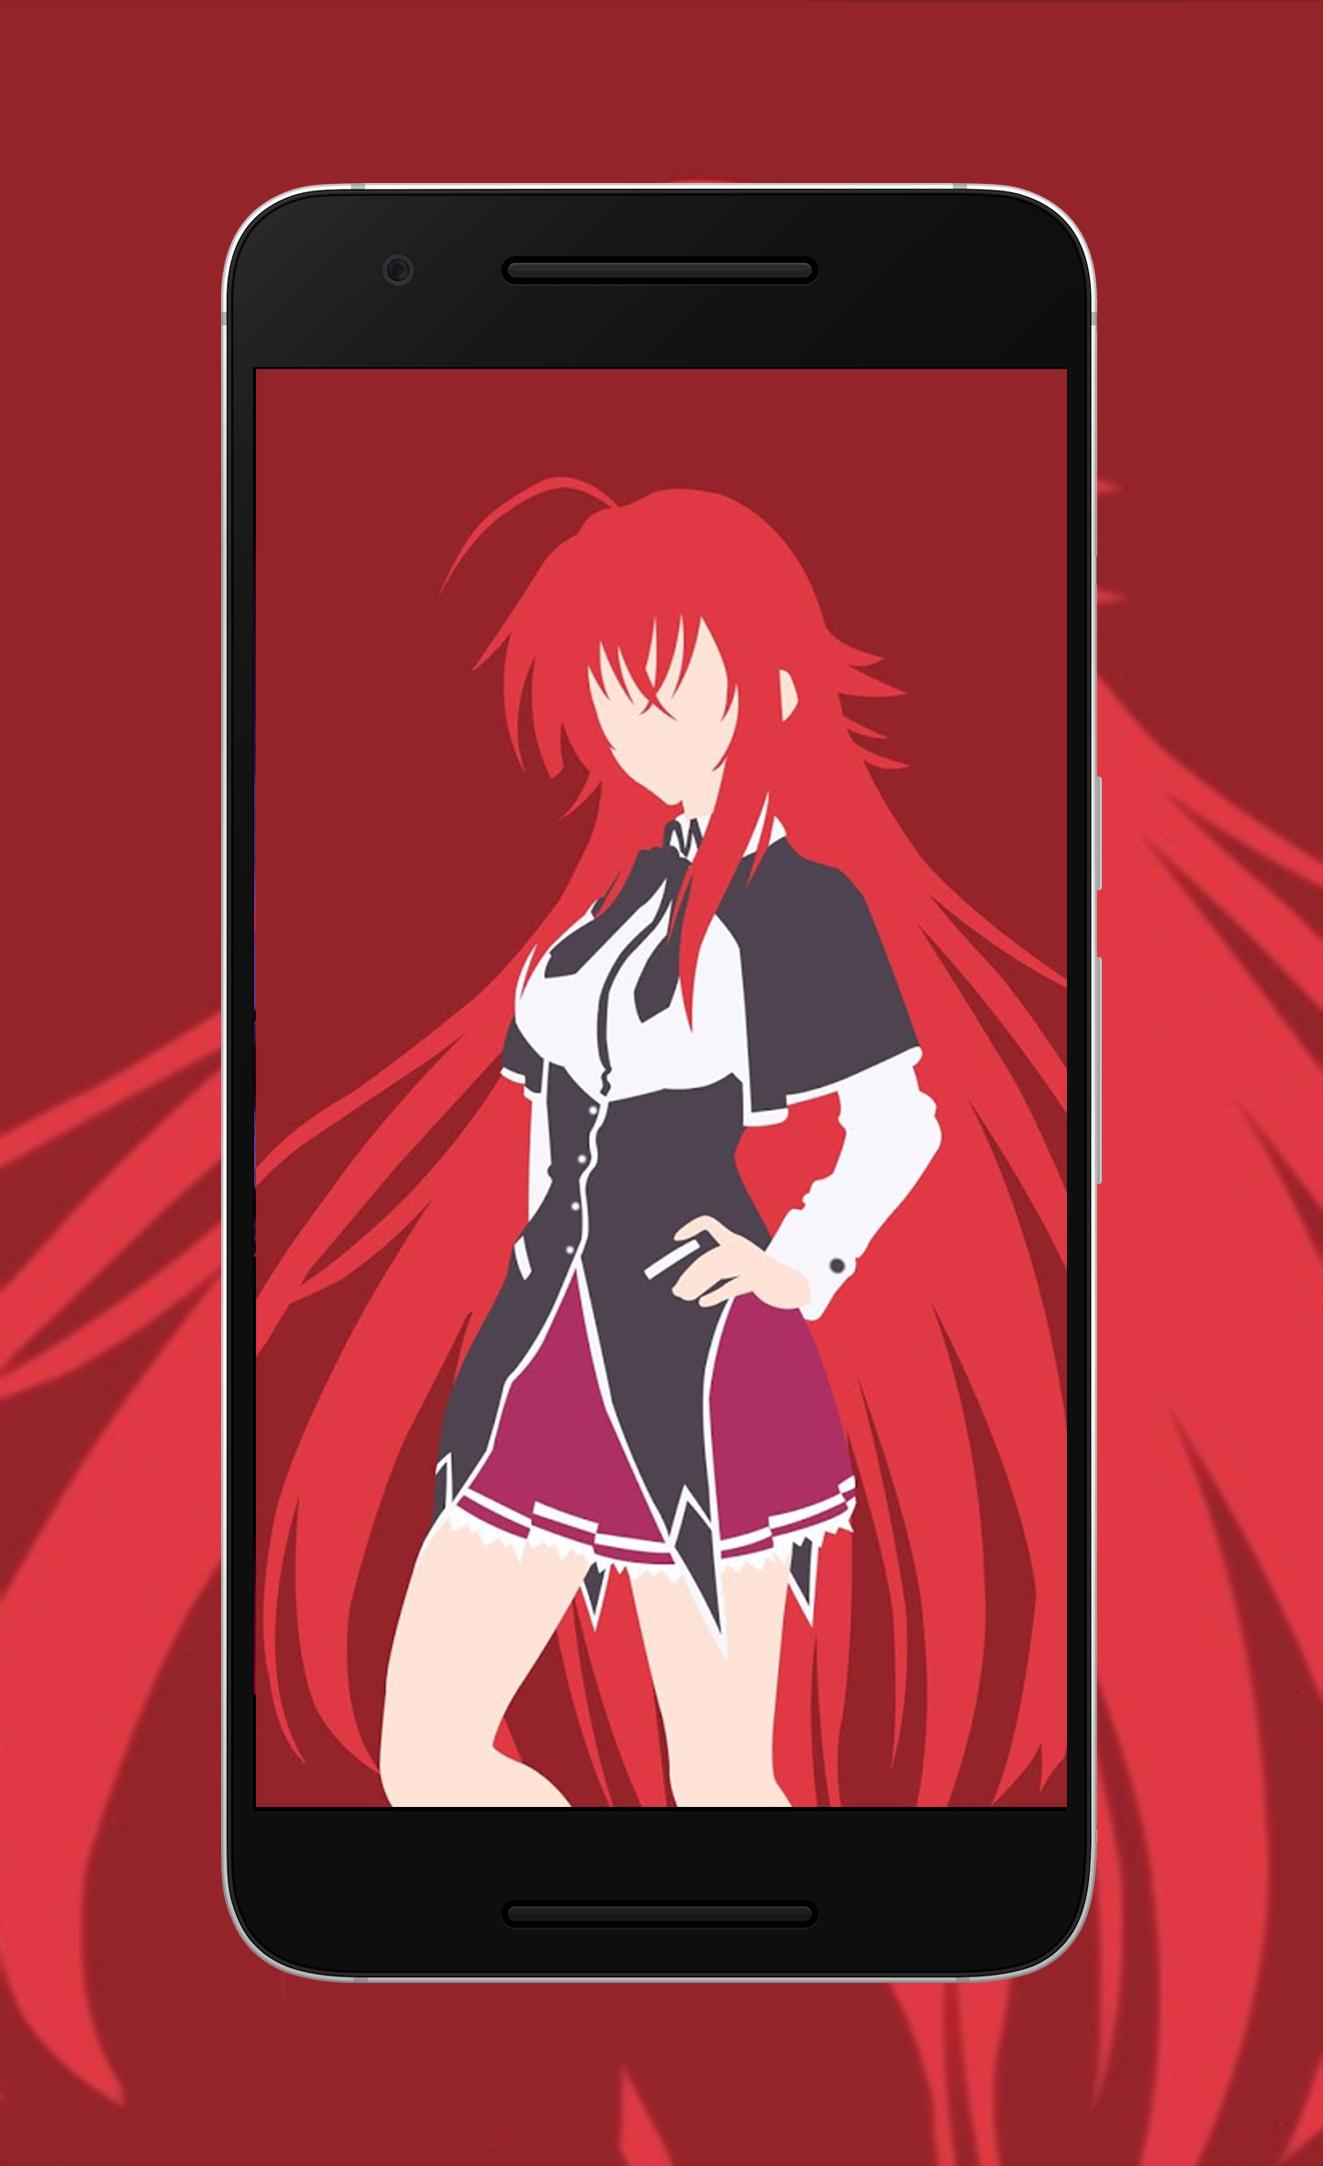 Anime Minimalist Wallpaper For Android Apk Download